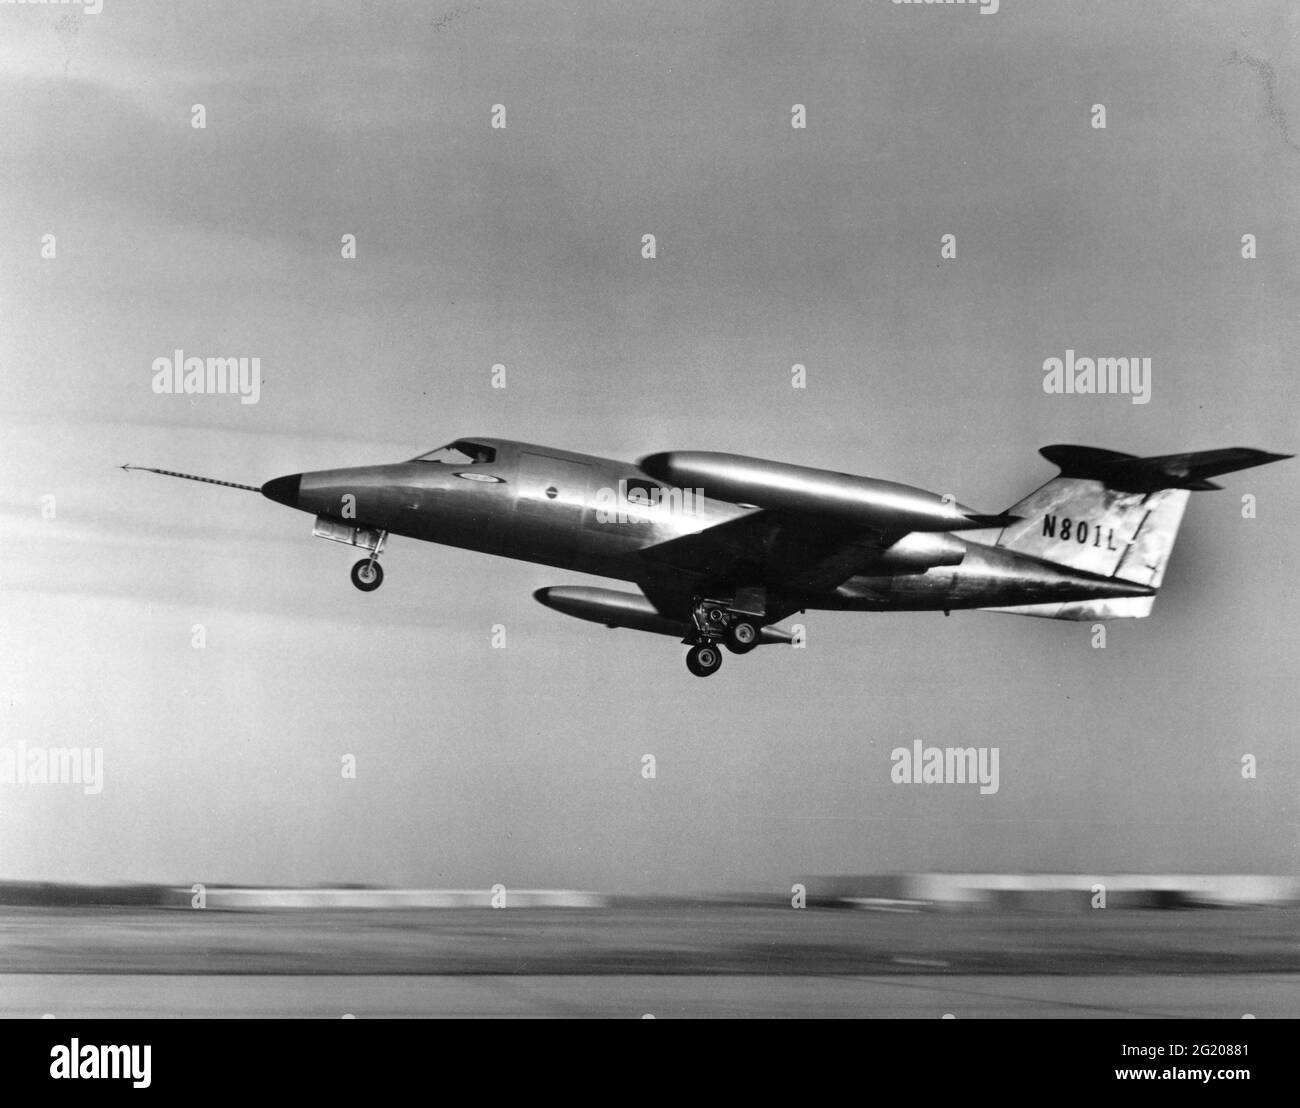 One of the first private, luxury aircraft, the Learjet 23, serial number 23-001 (N801L) takes off on its first flight, Wichita, KS, 10/7/1963. (Photo by Federal Aviation Administration/RBM Vintage Images) Stock Photo